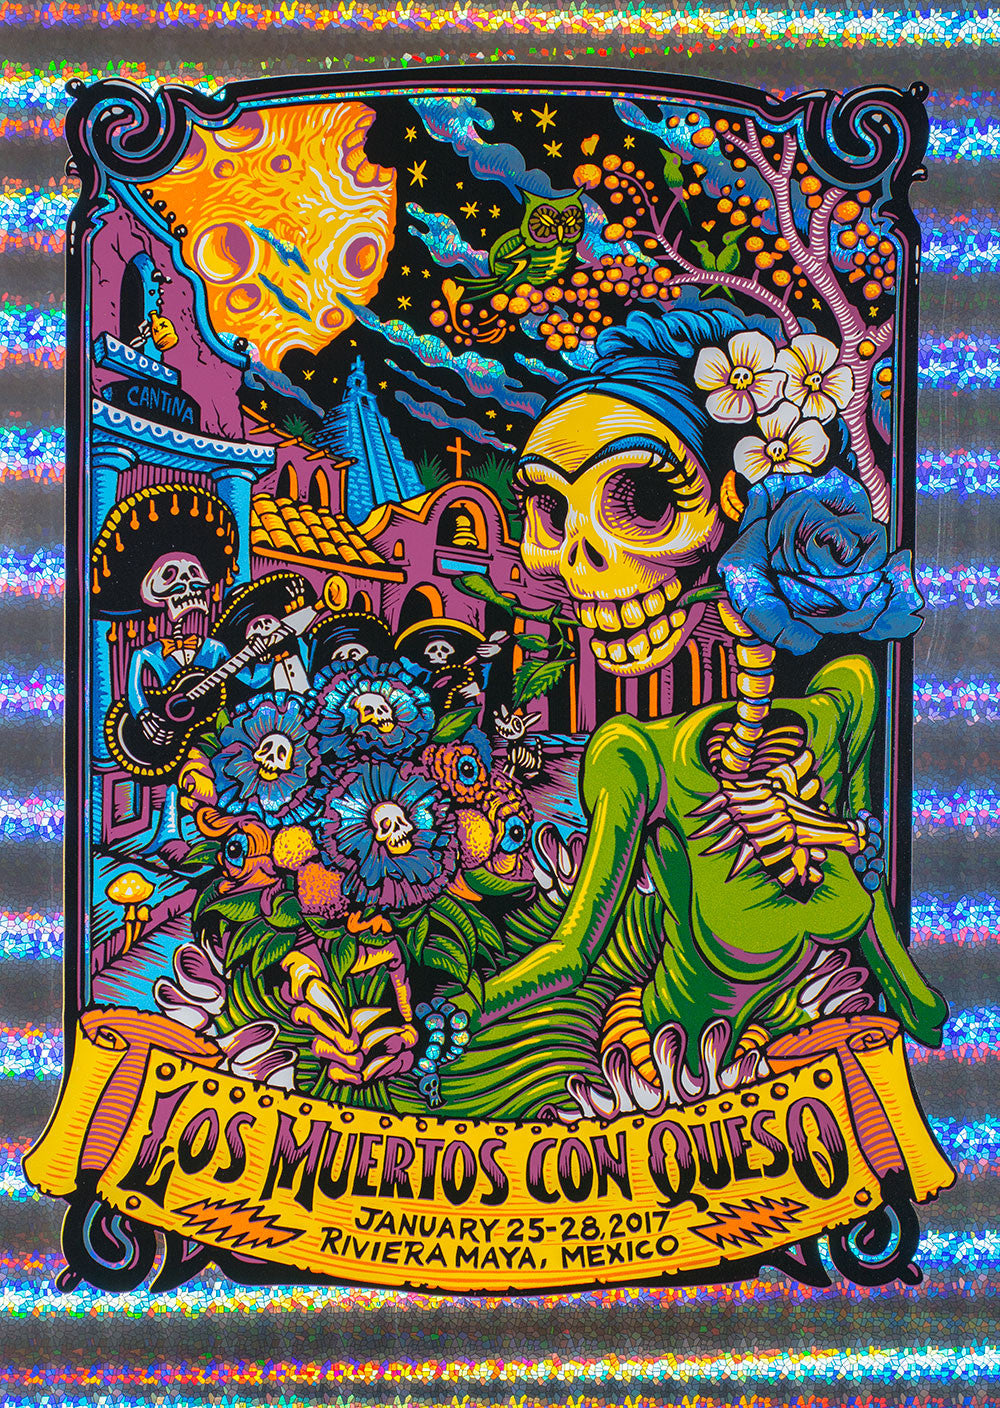 AJ Masthay "Los Muertos con Queso" Stained Glass Foil